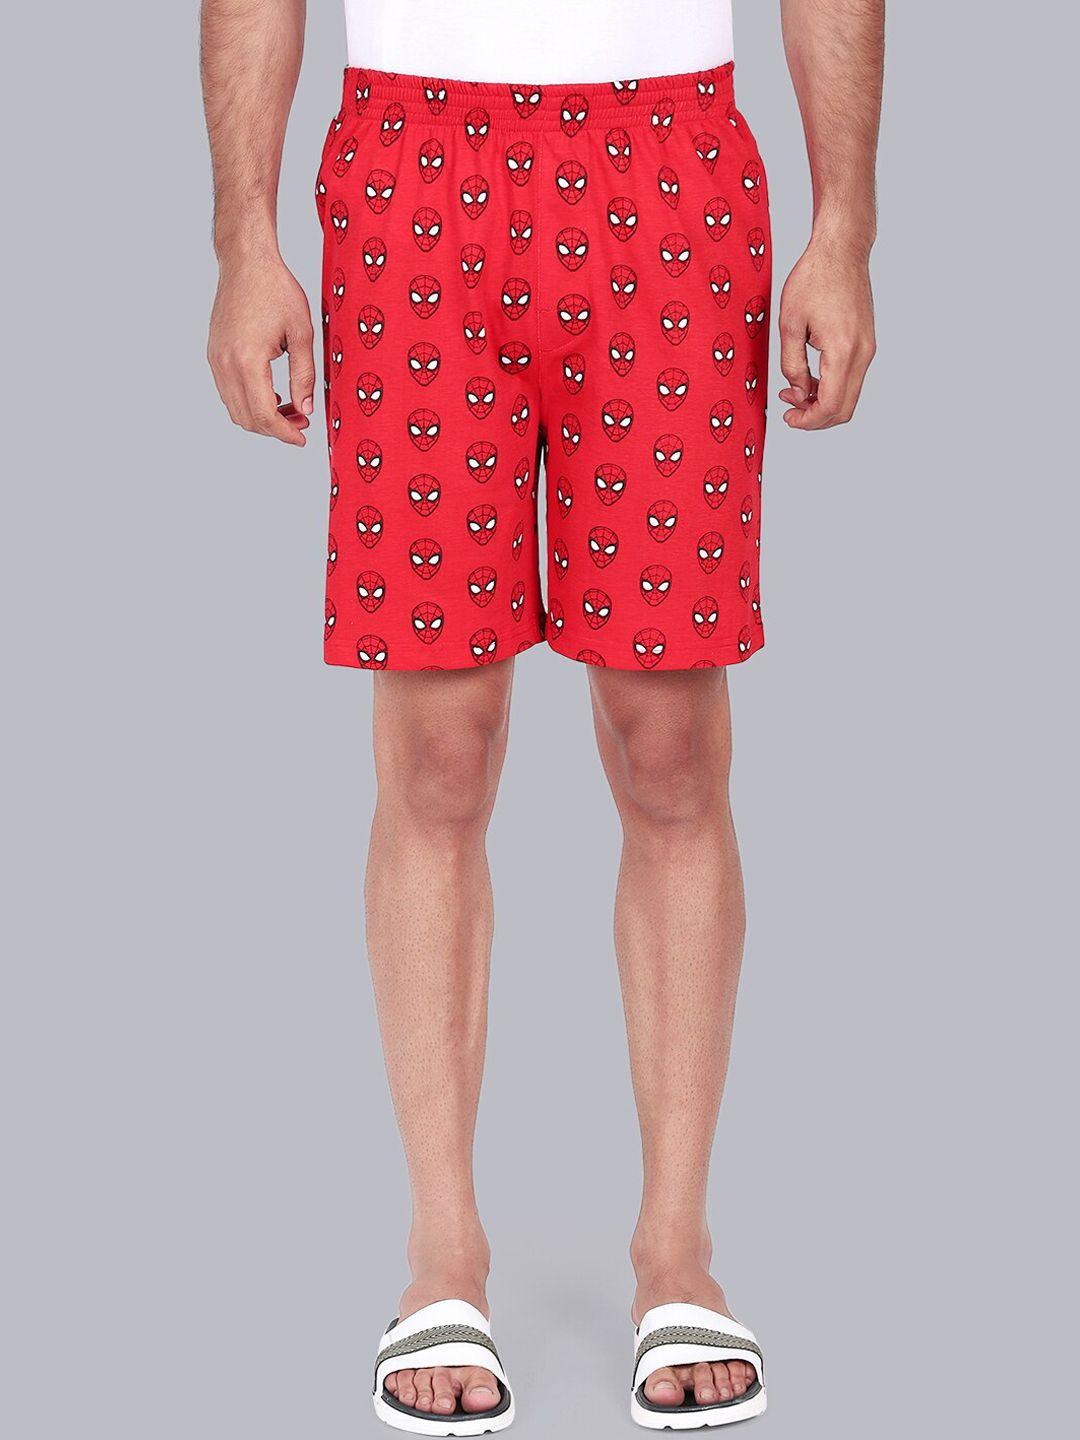 free authority men red & black spiderman featured shorts 8905030275225a